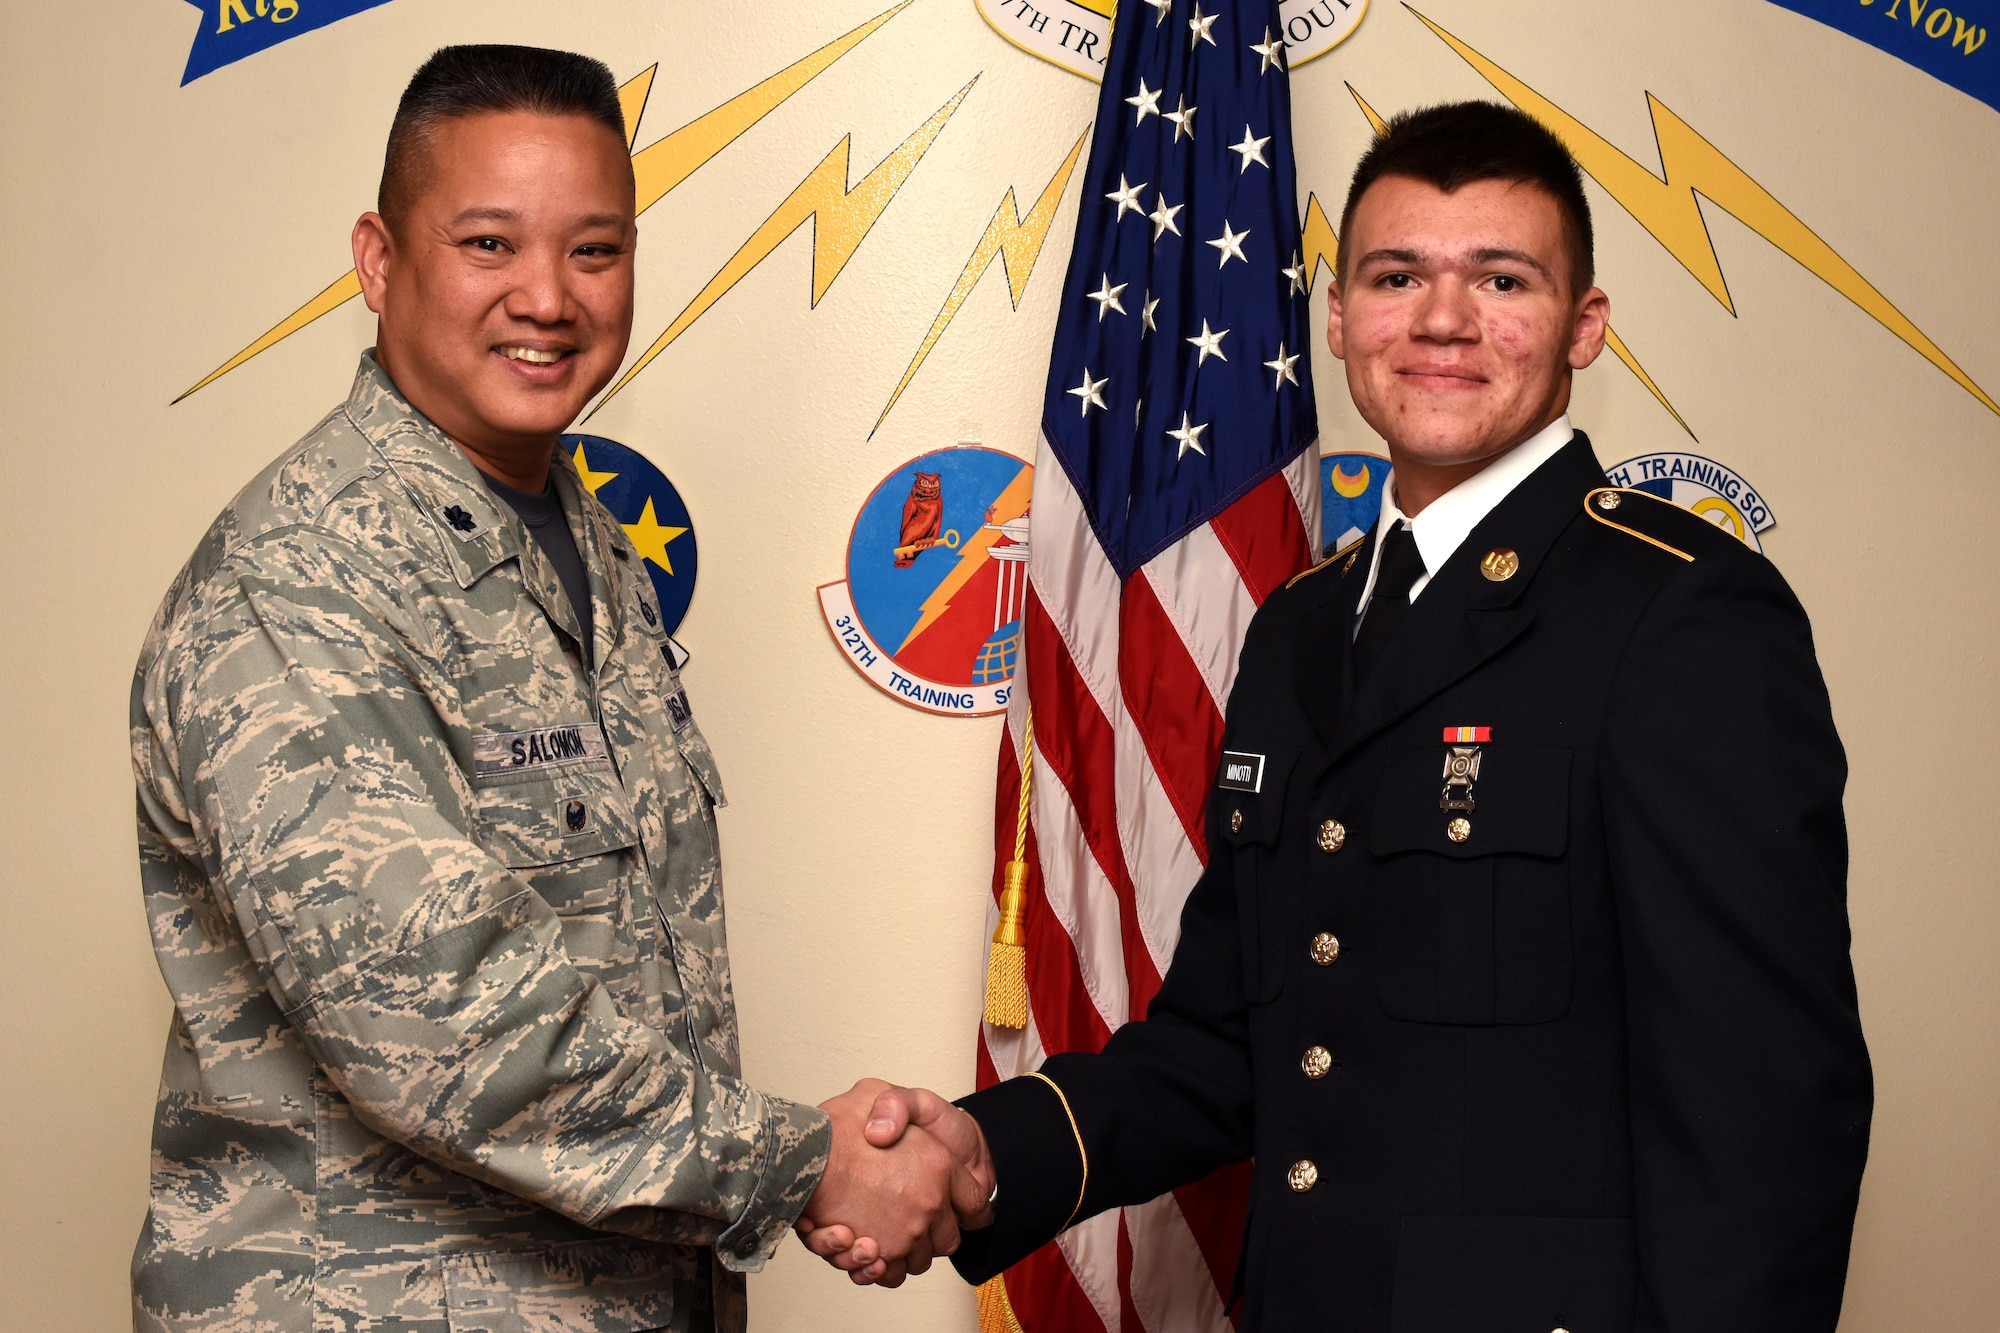 U.S. Air Force Col. Abraham Salomon, 17th Training Group deputy commander, congratulates the 312th Training Squadron Student of the Month winner, U.S. Army Pvt. Christopher Minotti, 312th TRS student, at the Brandenburg Hall on Goodfellow Air Force Base, Texas, Jan. 4, 2019. The 312th TRS’s mission is to provide Department of Defense and international customers with mission ready fire protection and special instruments graduates and provide mission support for the Air Force Technical Applications Center. (U.S. Air Force photo by Airman 1st Class Zachary Chapman/Released)